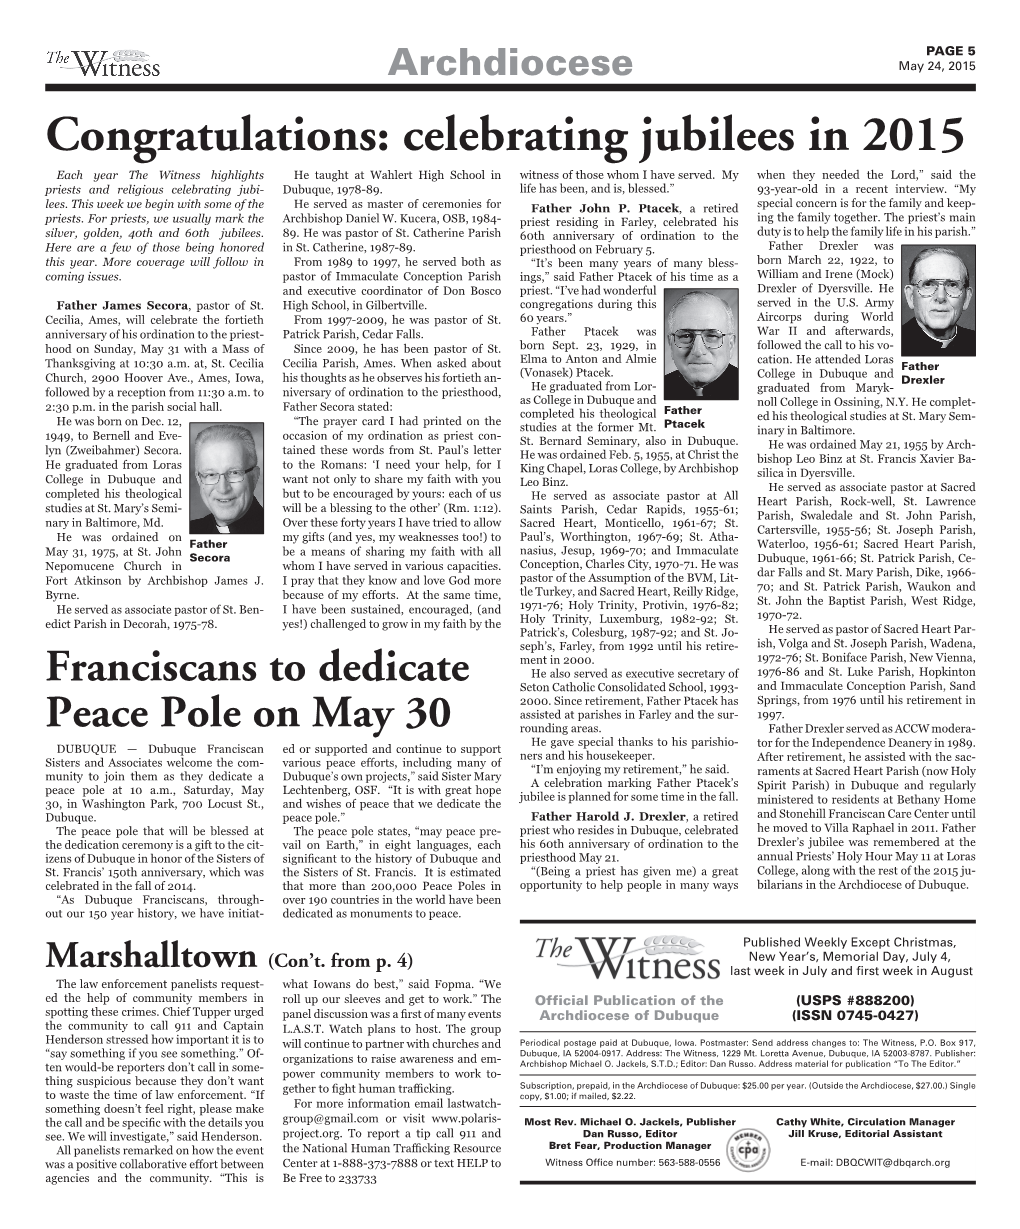 Congratulations: Celebrating Jubilees in 2015 Each Year the Witness Highlights He Taught at Wahlert High School in Witness of Those Whom I Have Served